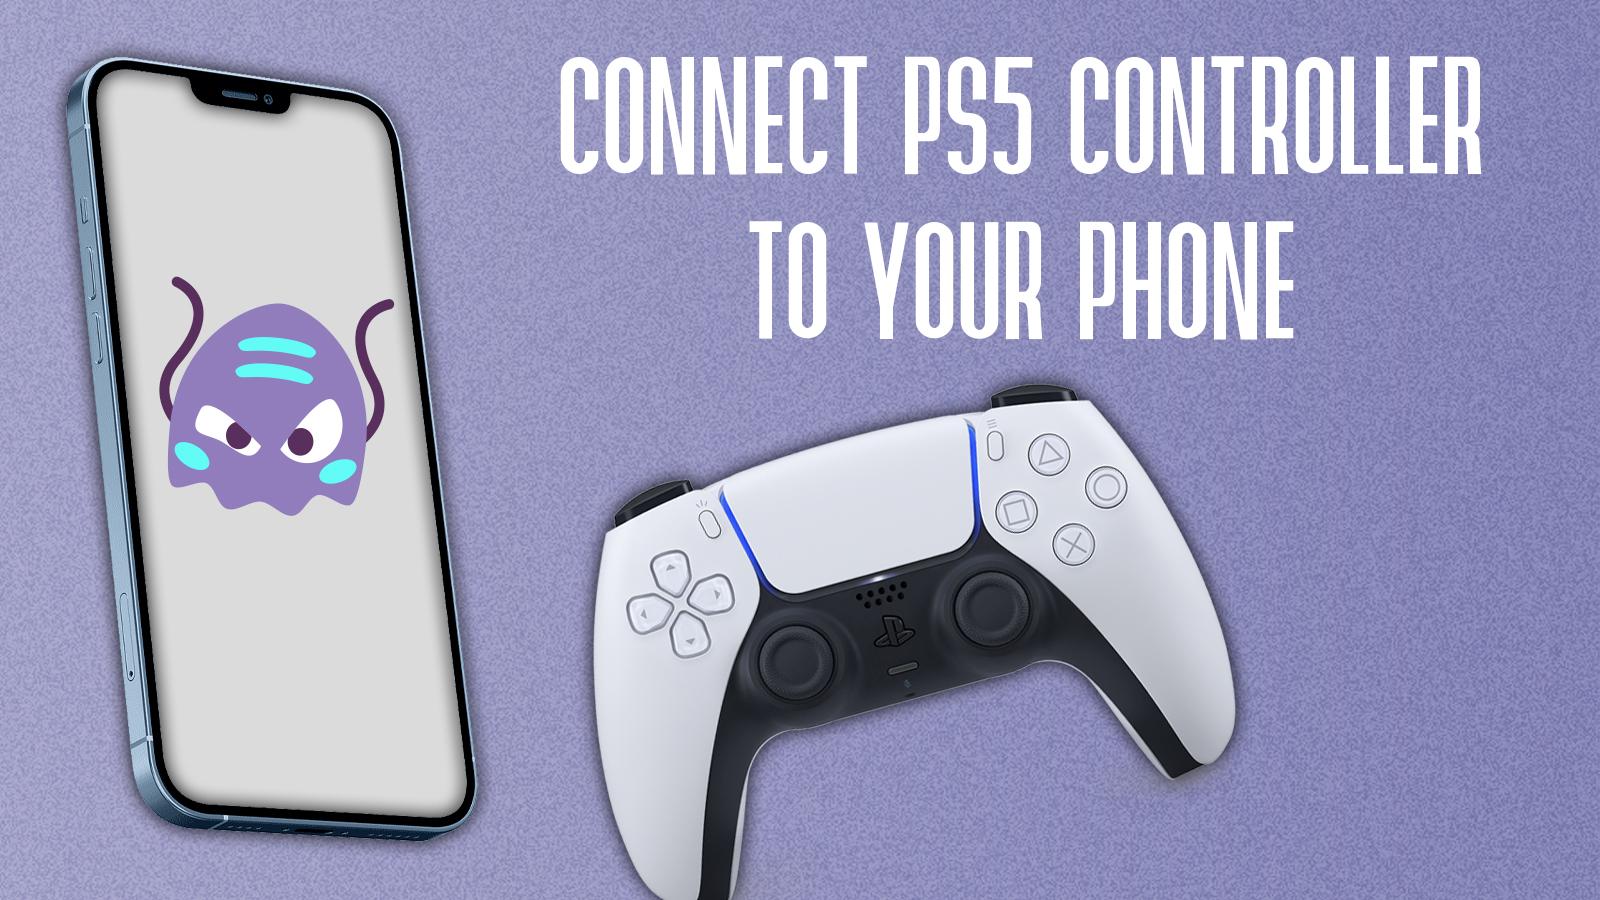 How to Disconnect PS5 Controller From Bluetooth & Reconnect to PS5 (Fast  Method!) 